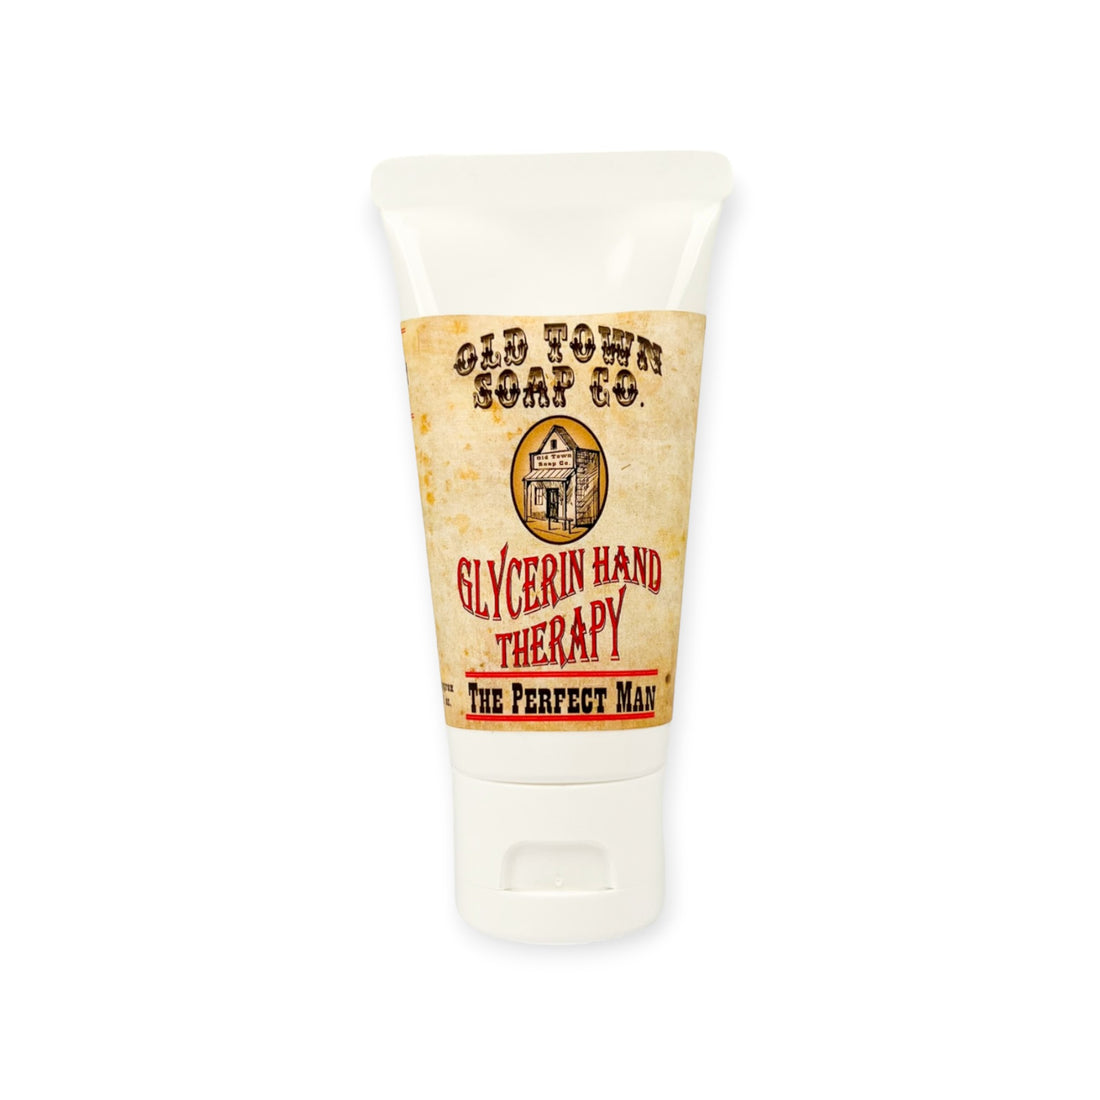 The Perfect Man 2oz Glycerin Hand Therapy